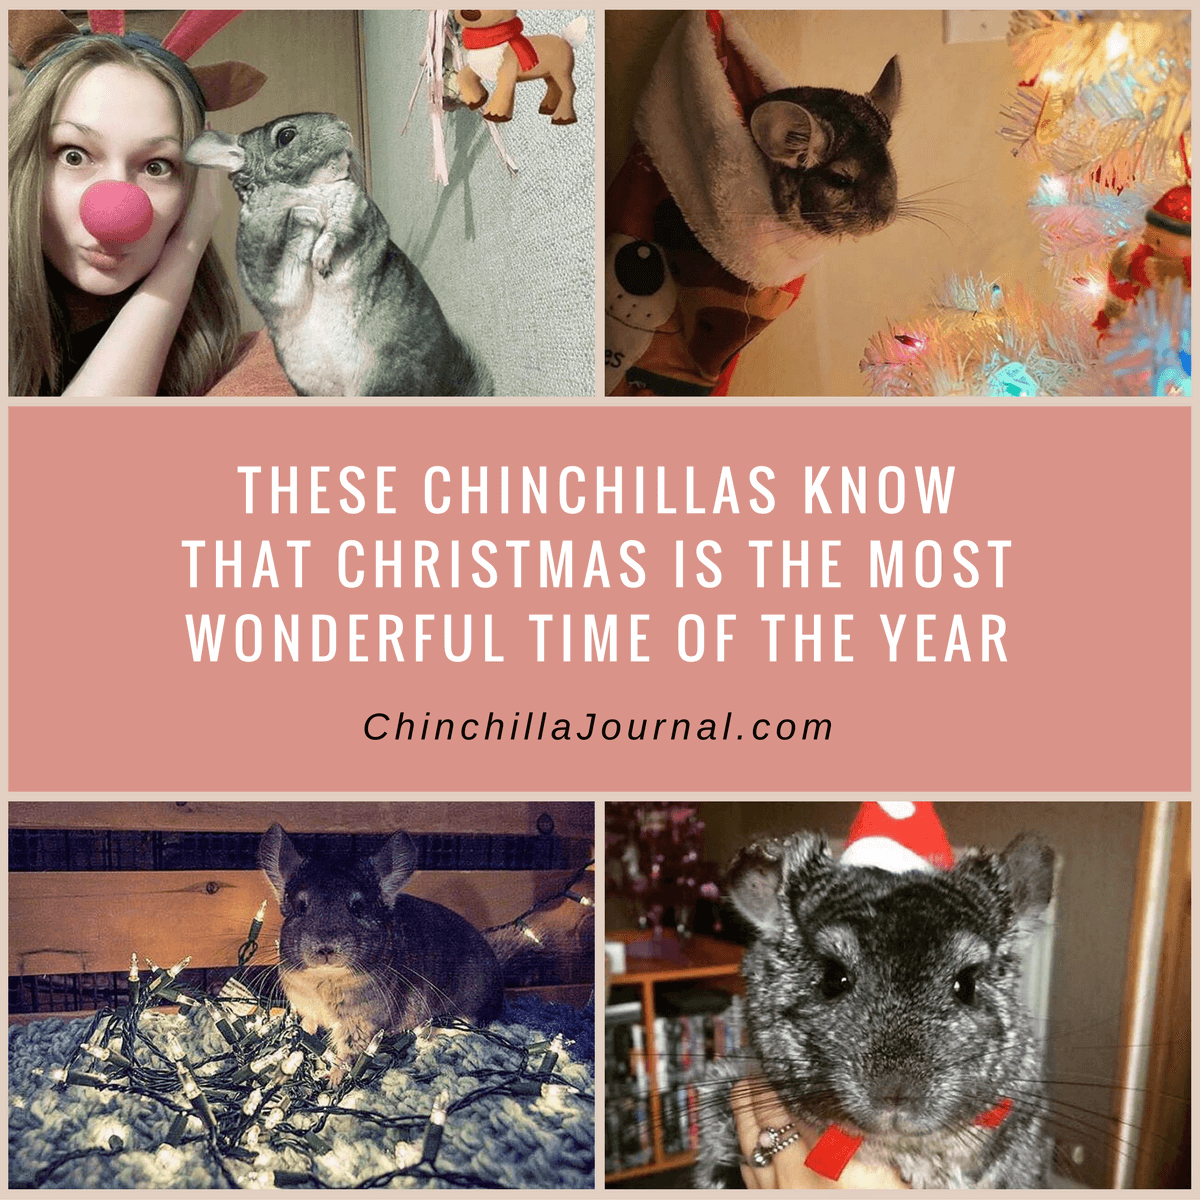 These Chinchillas Know That Christmas Is The Most Wonderful Time Of The Year